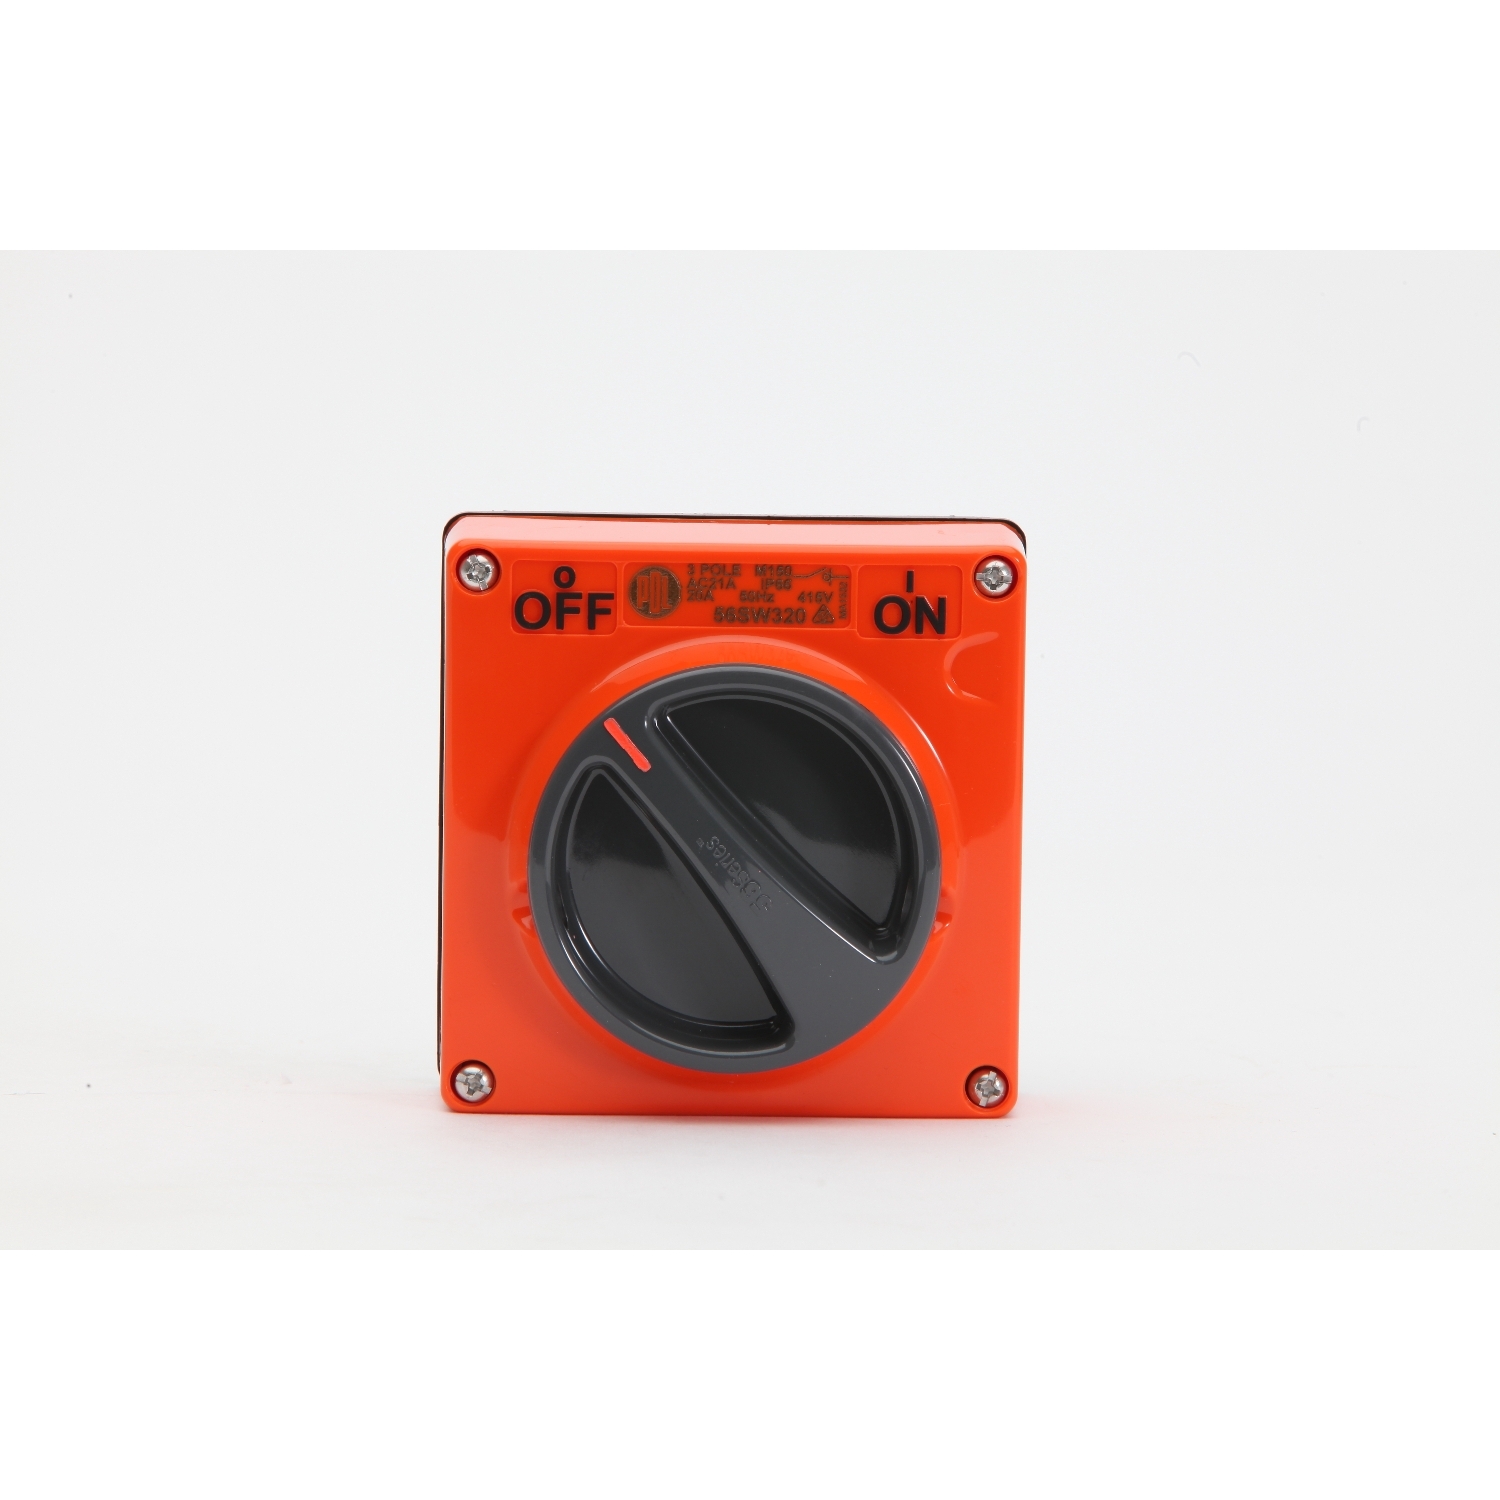 PDL 56 Series - Switch 20A 415V 3-Pole IP66 - Chemical-Resistant Orange